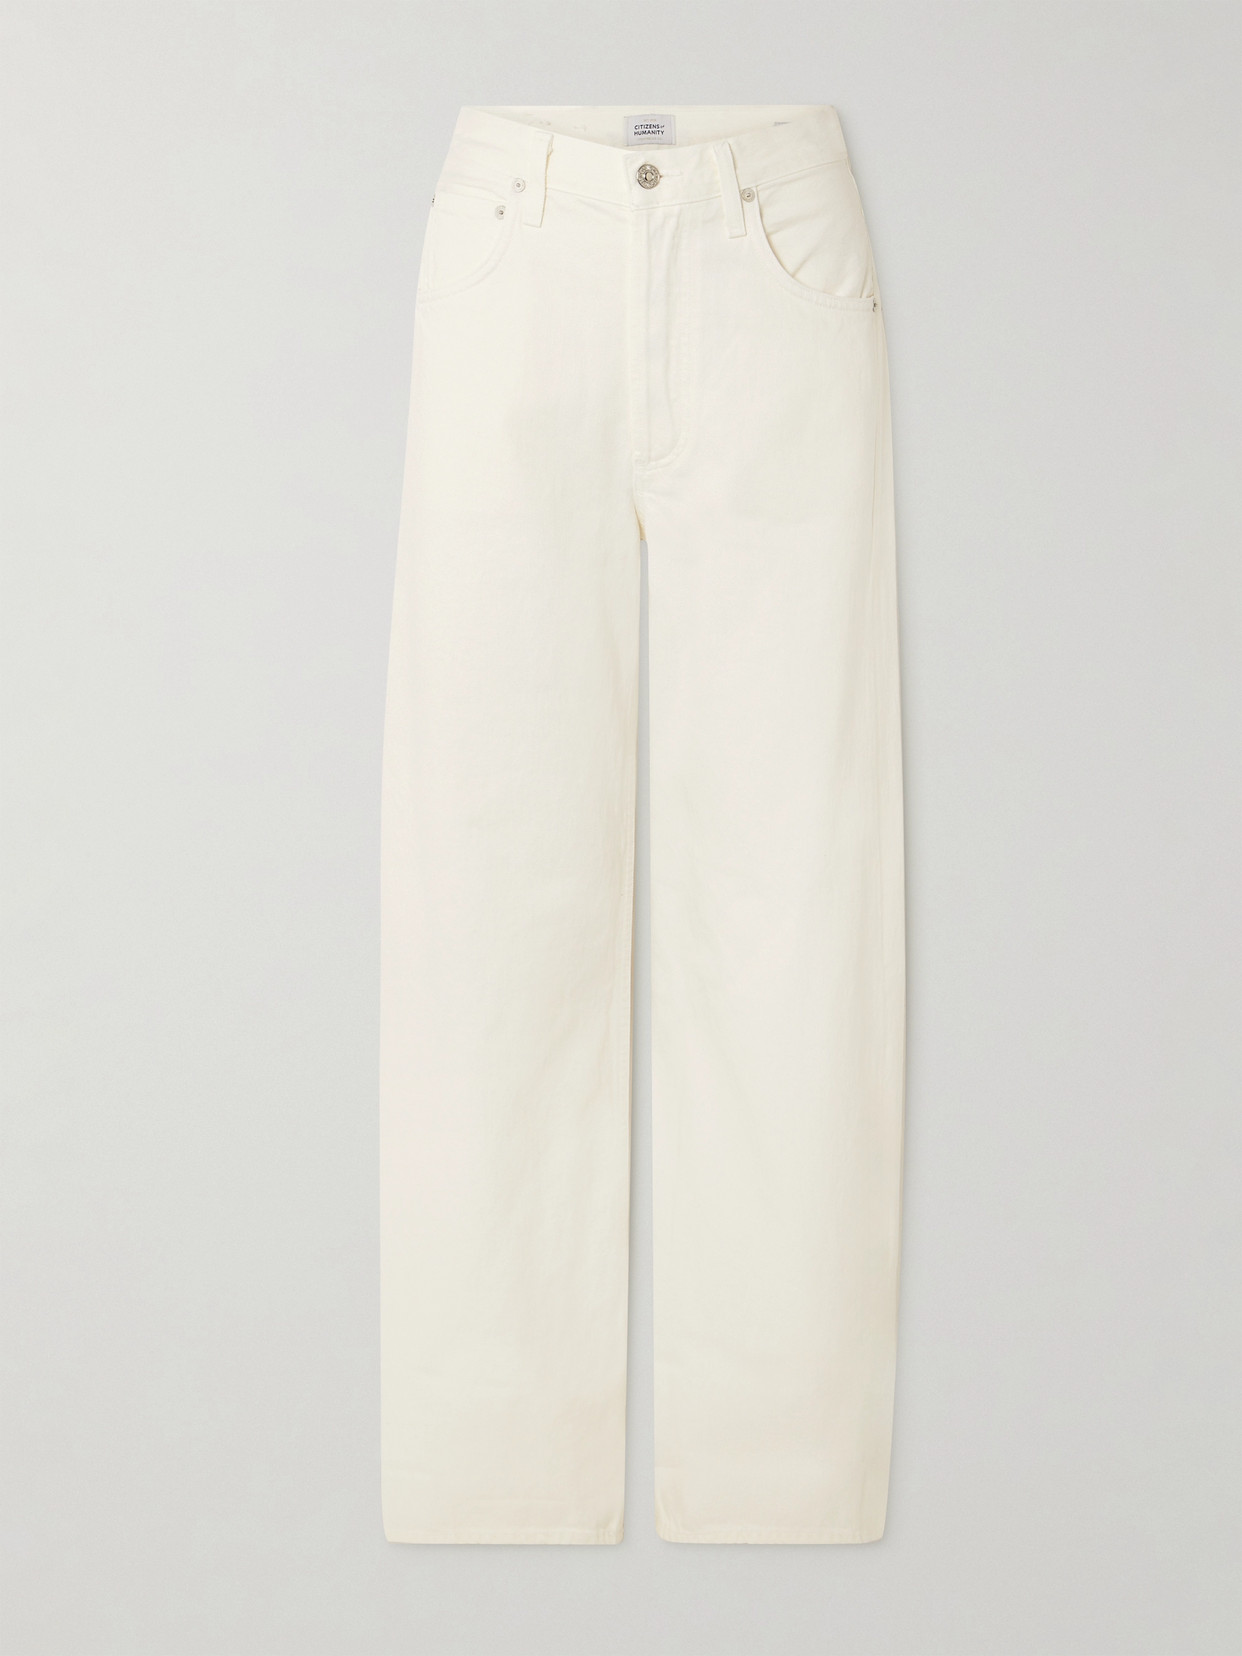 Ayla Cropped High-Rise Wide-Leg Jeans